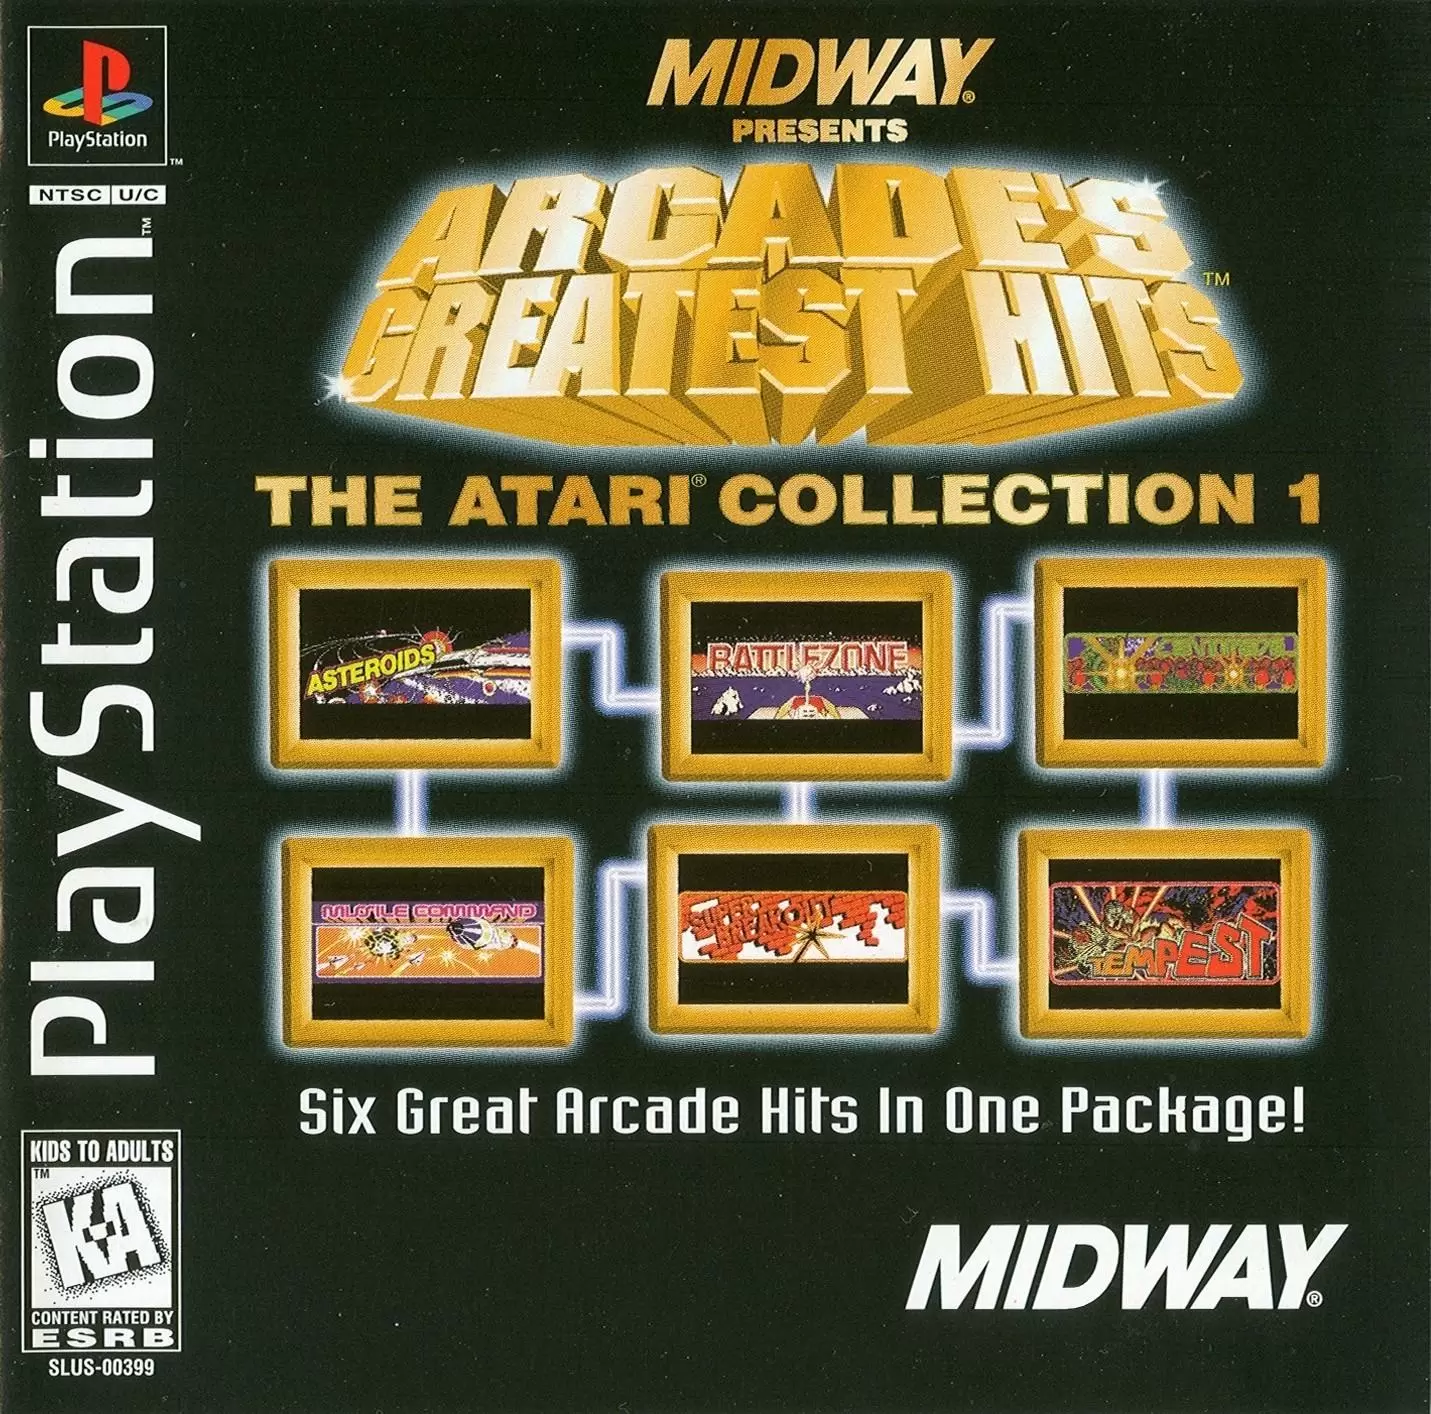 Playstation games - Arcade\'s Greatest Hits: The Atari Collection 1